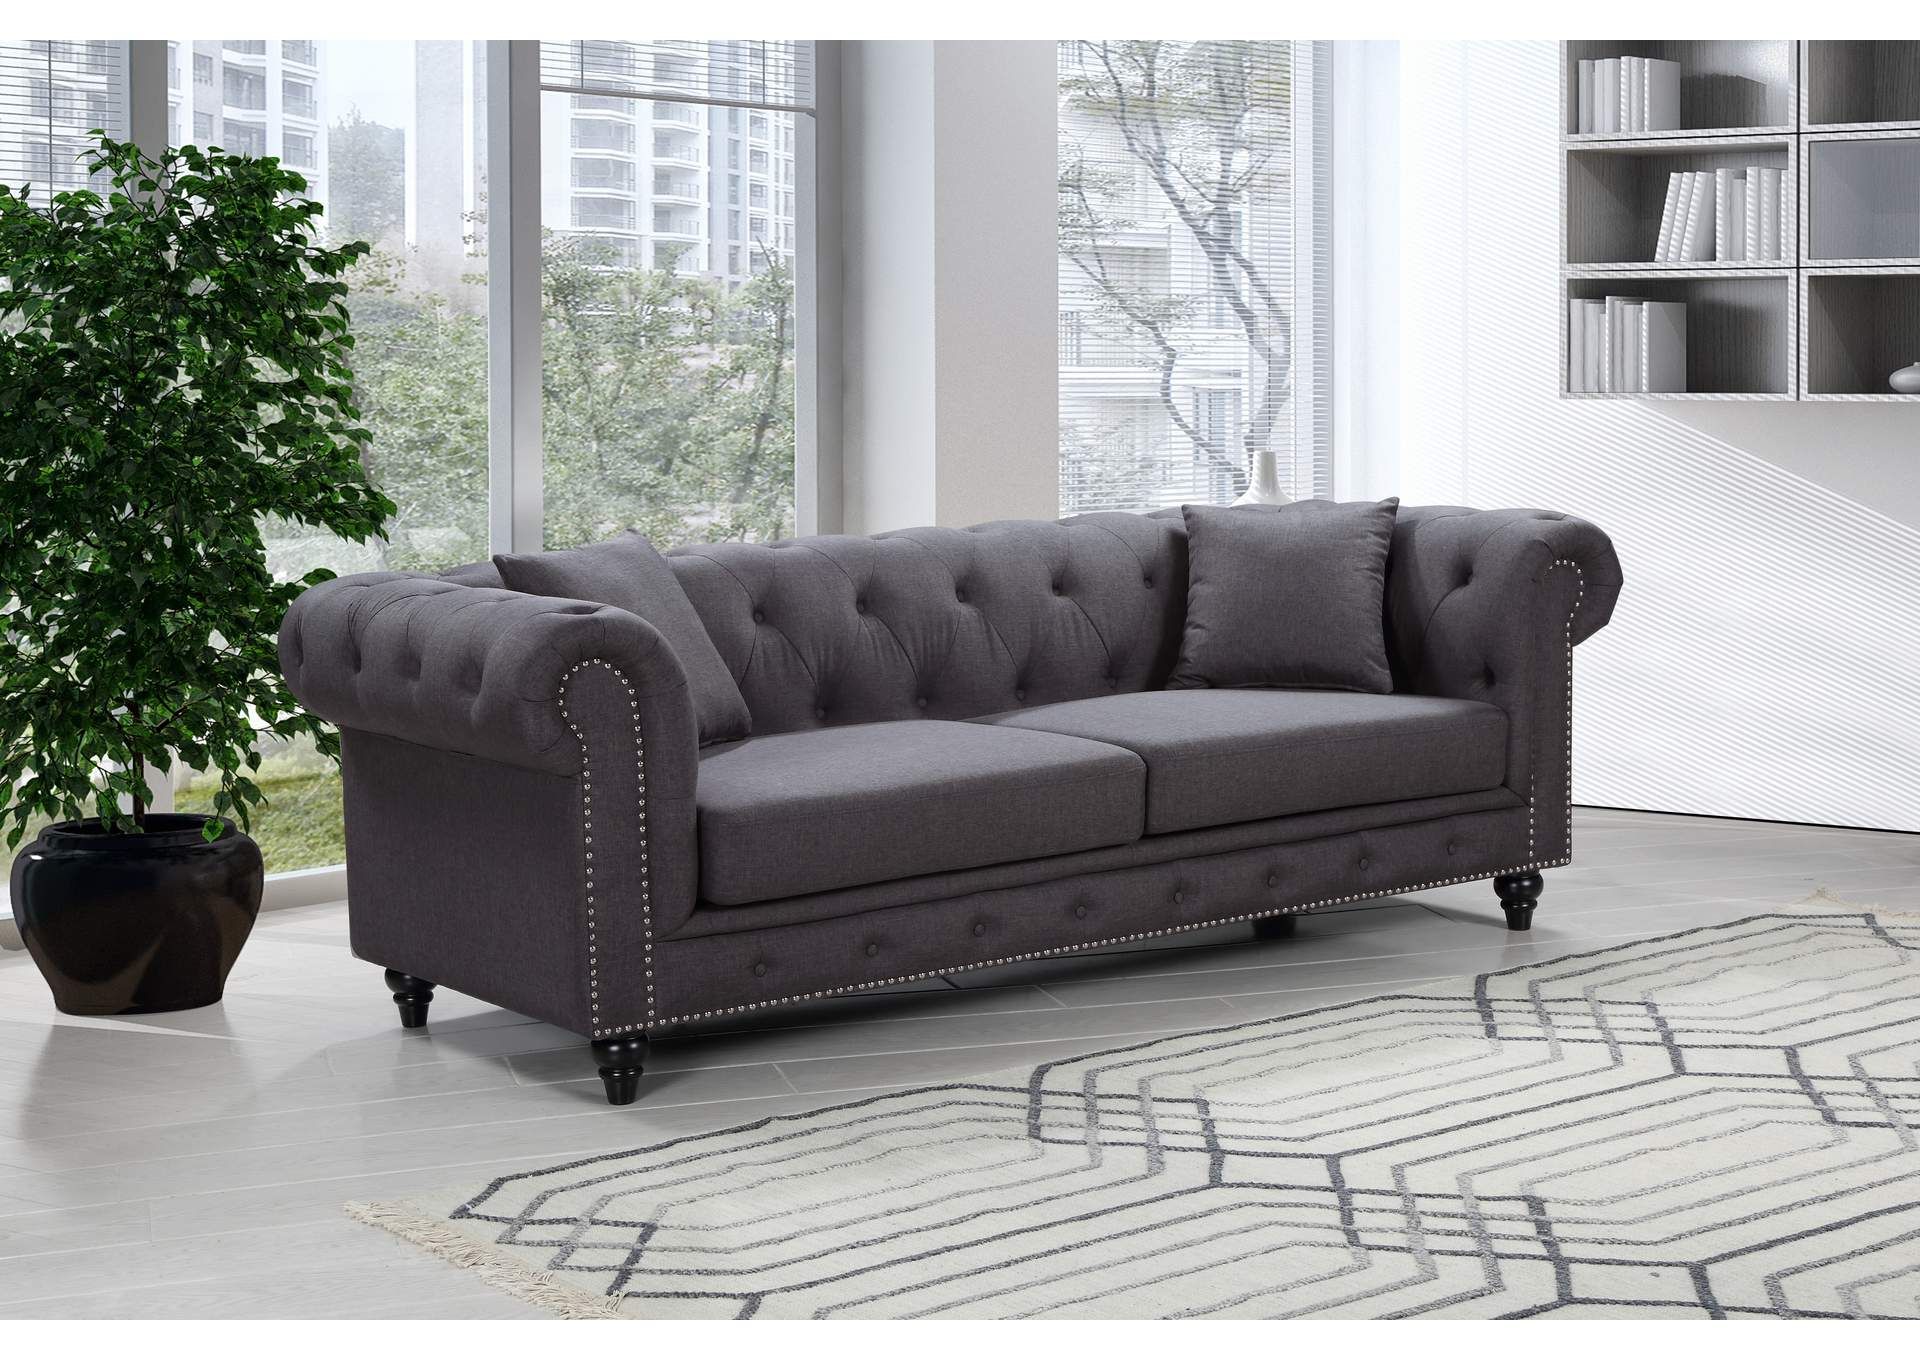 Chesterfield Grey Linen Sofa Best Buy Furniture And Mattress With Regard To Gray Linen Sofas (View 11 of 20)